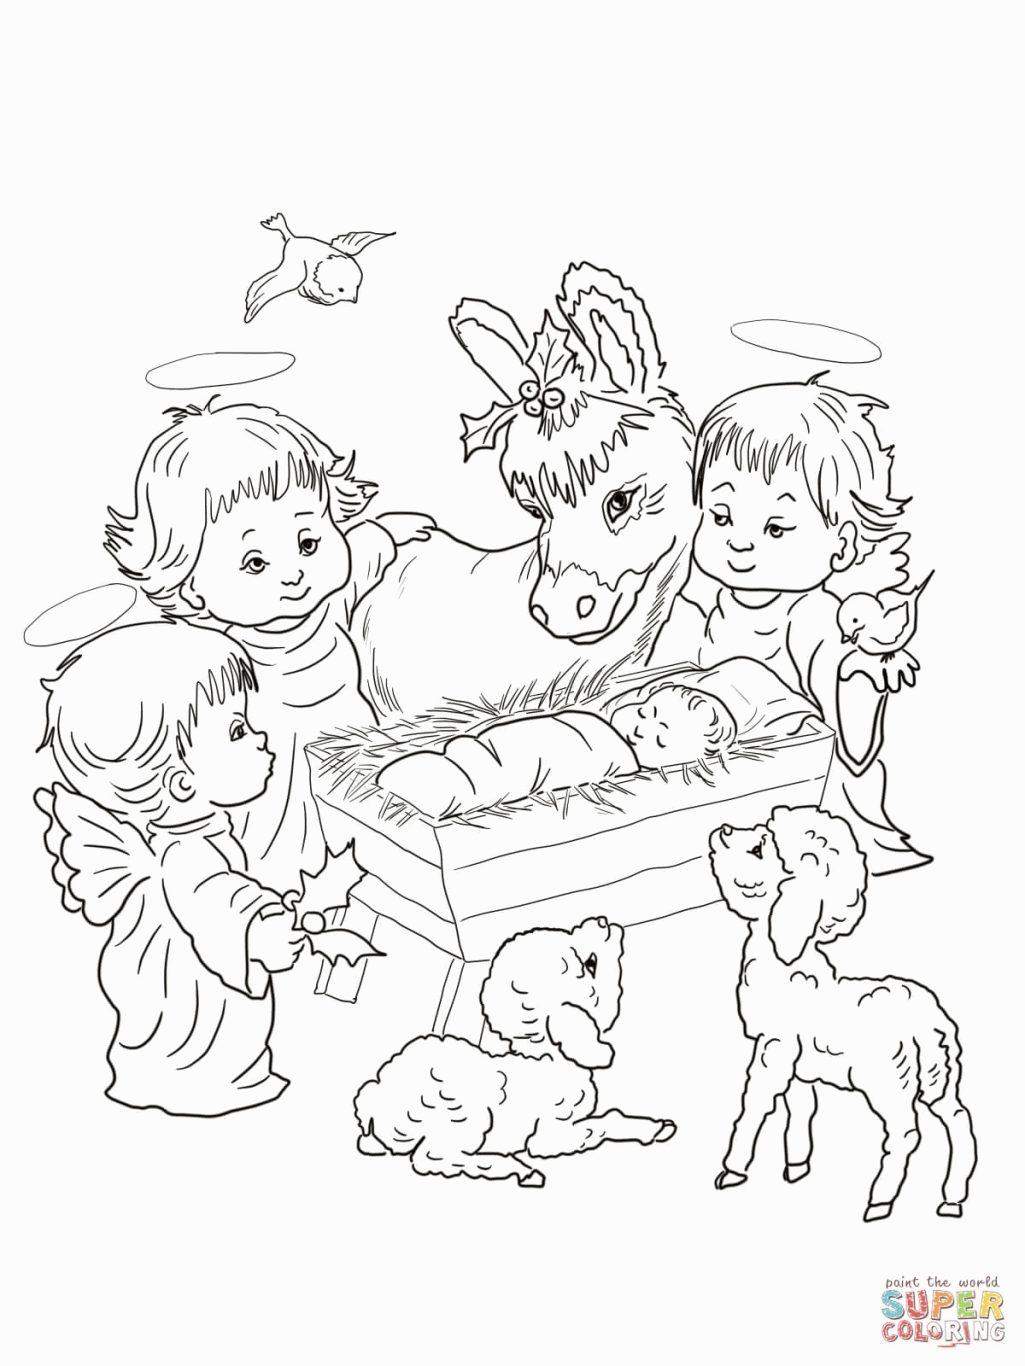 Nativity Scene With Cute Angels And Animals Coloring Page ...